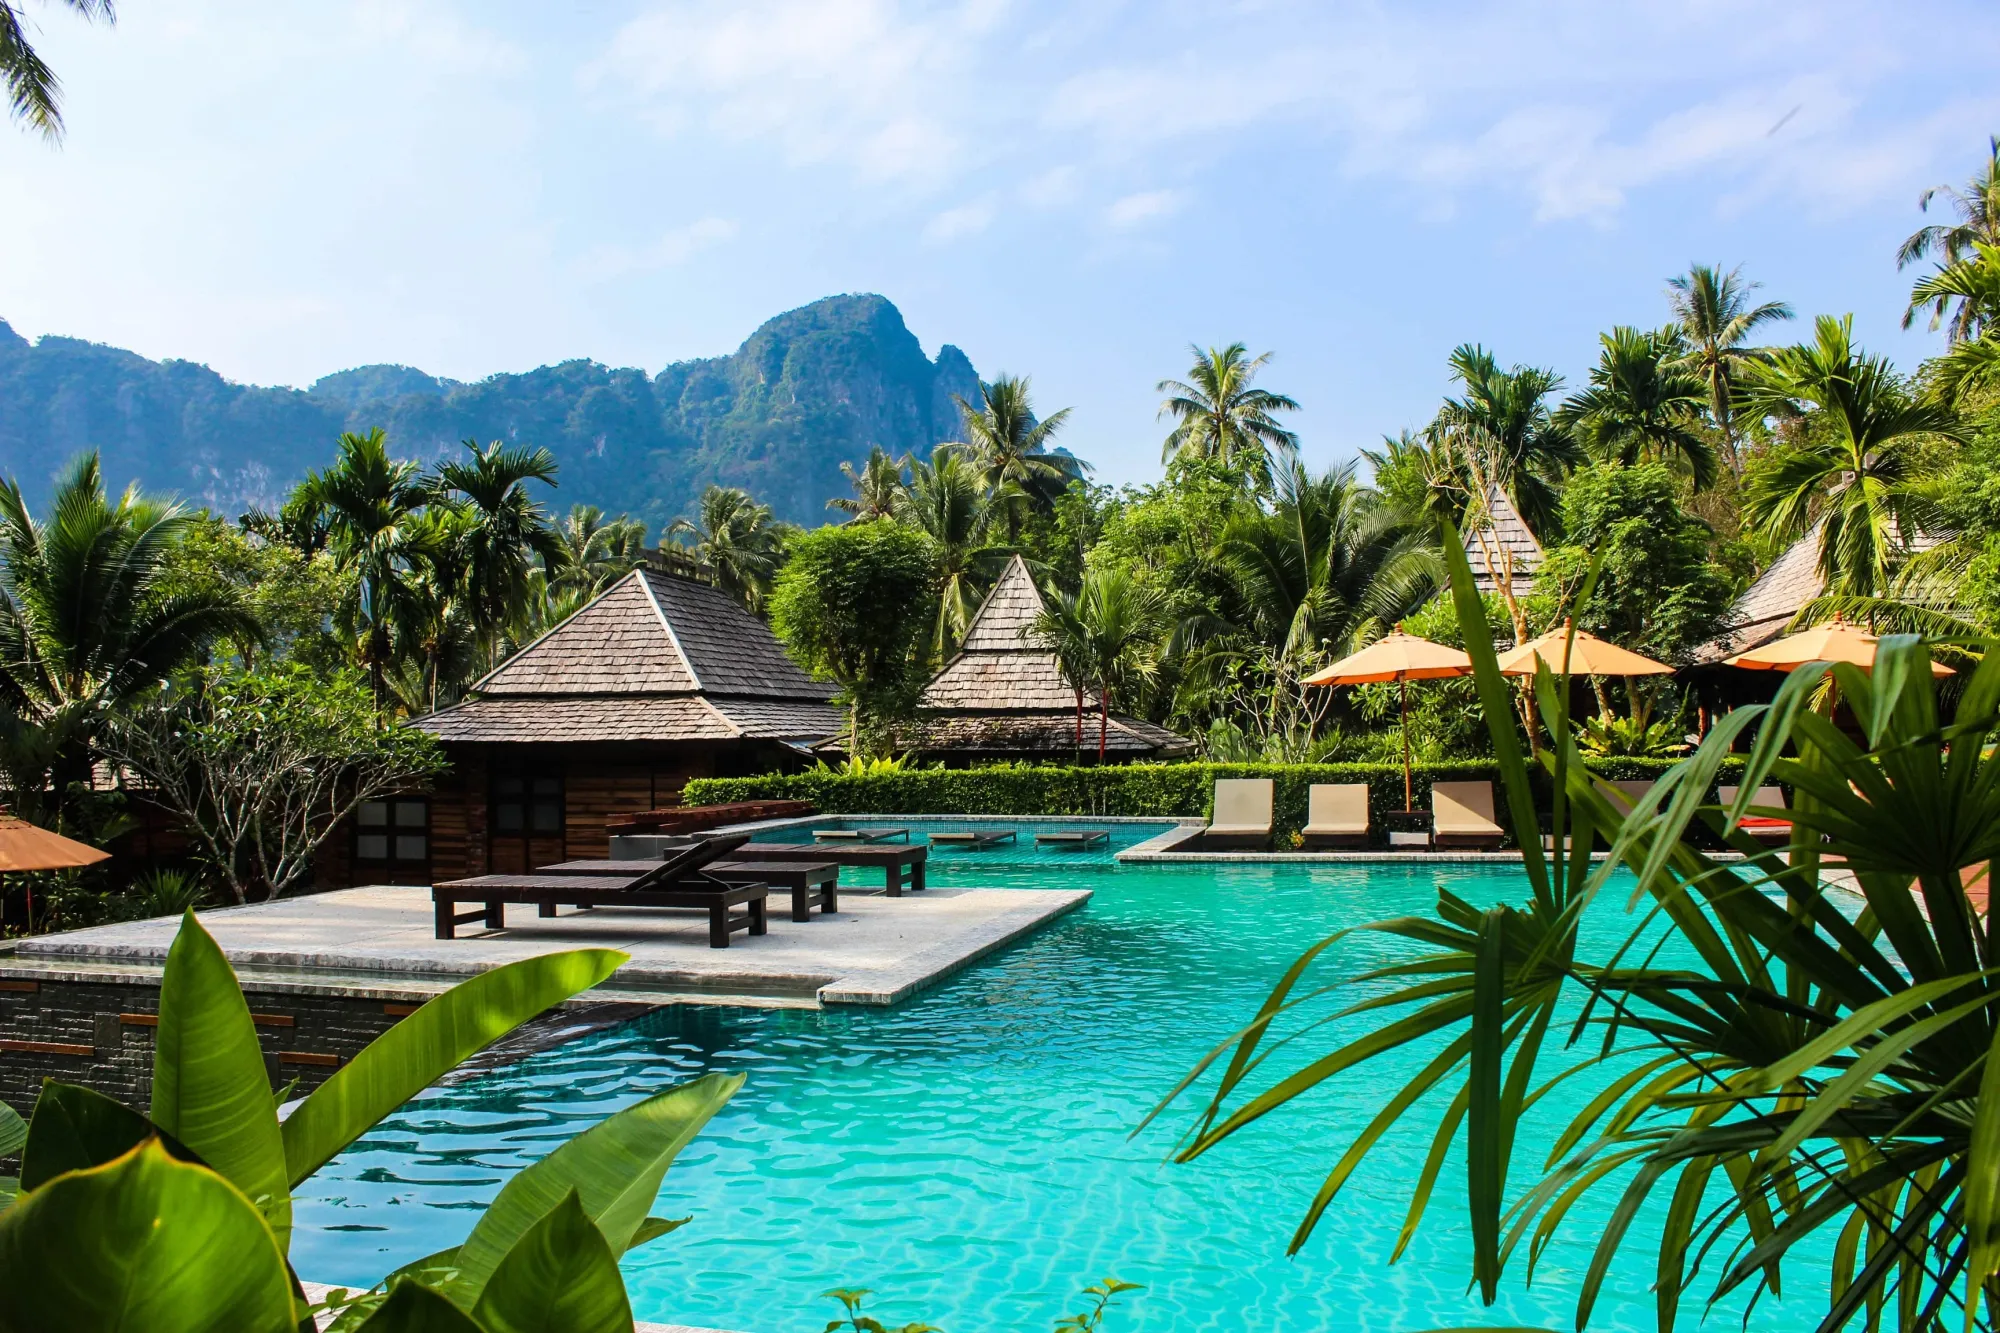 Image of a resort in Thailand